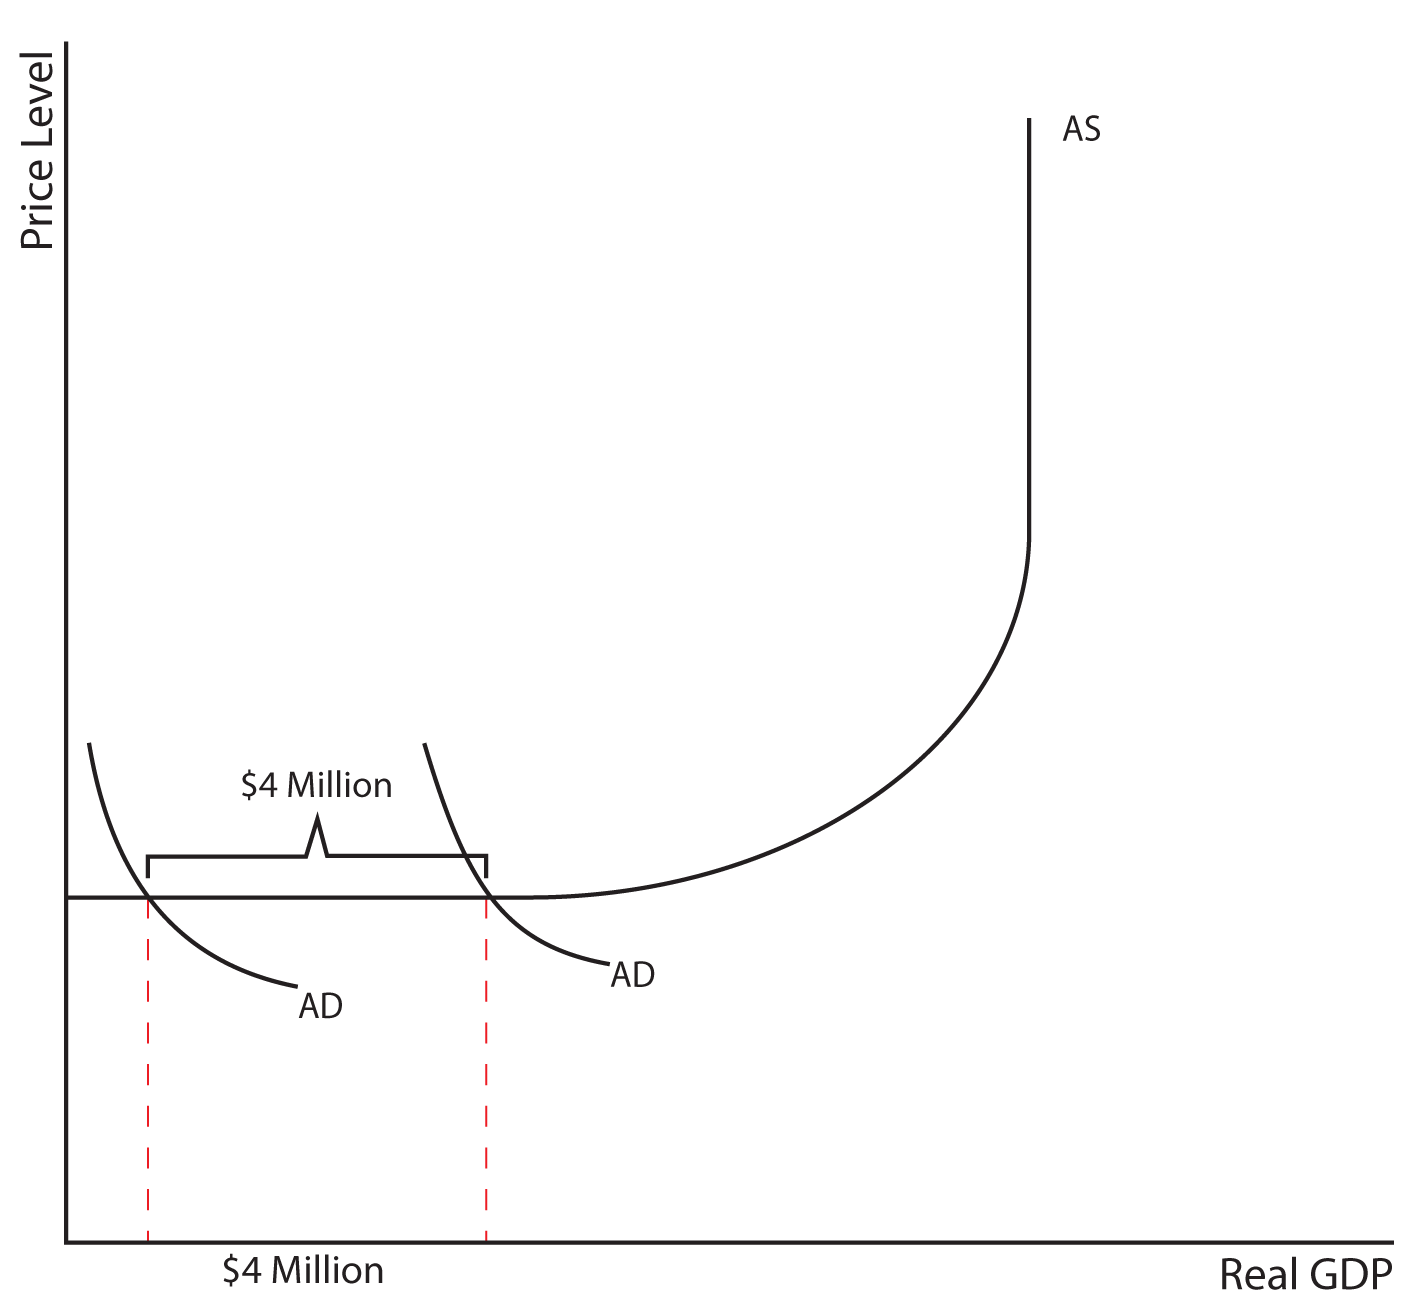 Image 9.01. This image depicts one graph. This graph's X axis is labeled Real GDP, and its Y axis is labeled Price Level. A solid black line starts at a point on the lower half of the Y axis and extends horizontally before curving upward toward a vertical direction. The line is labeled AS. Near the Y axis, along the horizontal part of line AS, there are two curved lines that slope down through line AS. Each of these curved lines is labeled AD. Though both AD lines have the same Y values, one line is located at lower values along the X axis and the other is spaced away at higher values along the X axis. The space between the two AD lines represents $4 Million. At the point where each curved line passes through line AS, a red dotted line descends to the X axis. These two red dotted lines also show that the space between them represents $4 Million.